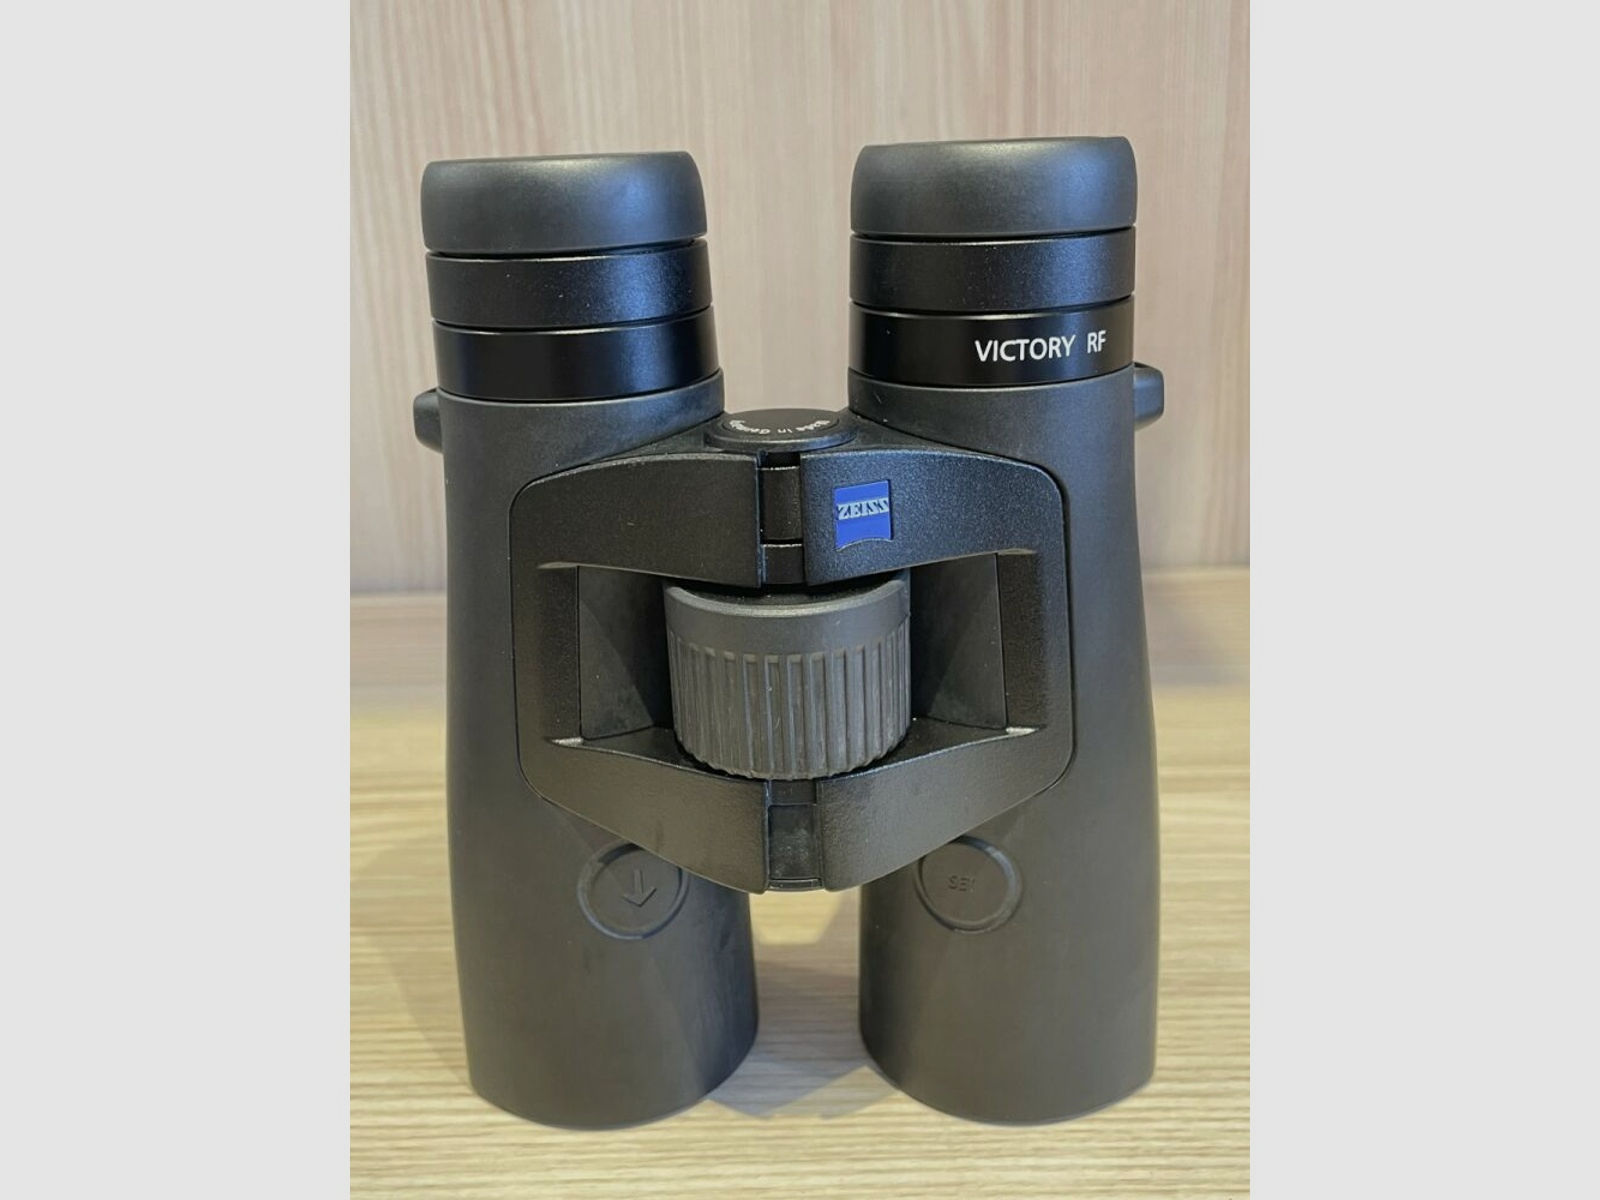 ZEISS	 VICTORY RF 8x42